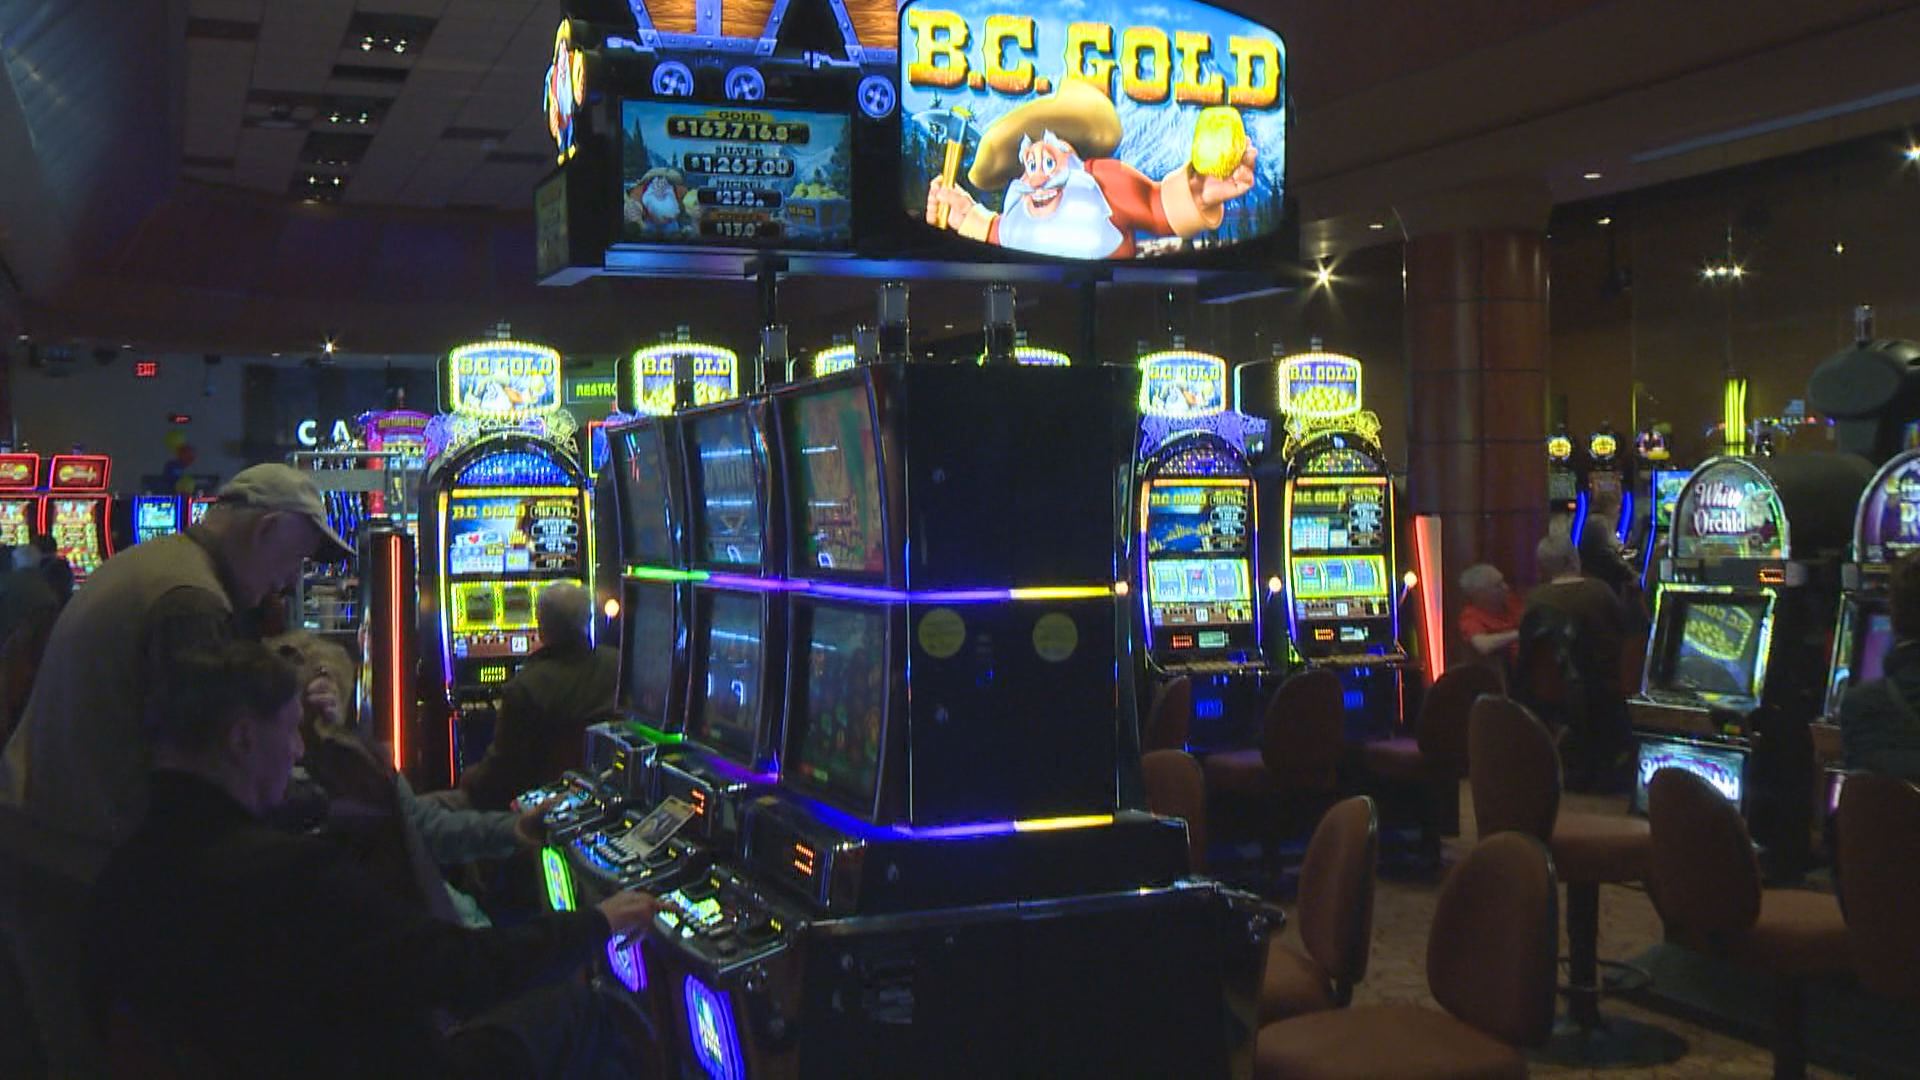 More Vegas casinos hit by cyberattacks, slot machines go down